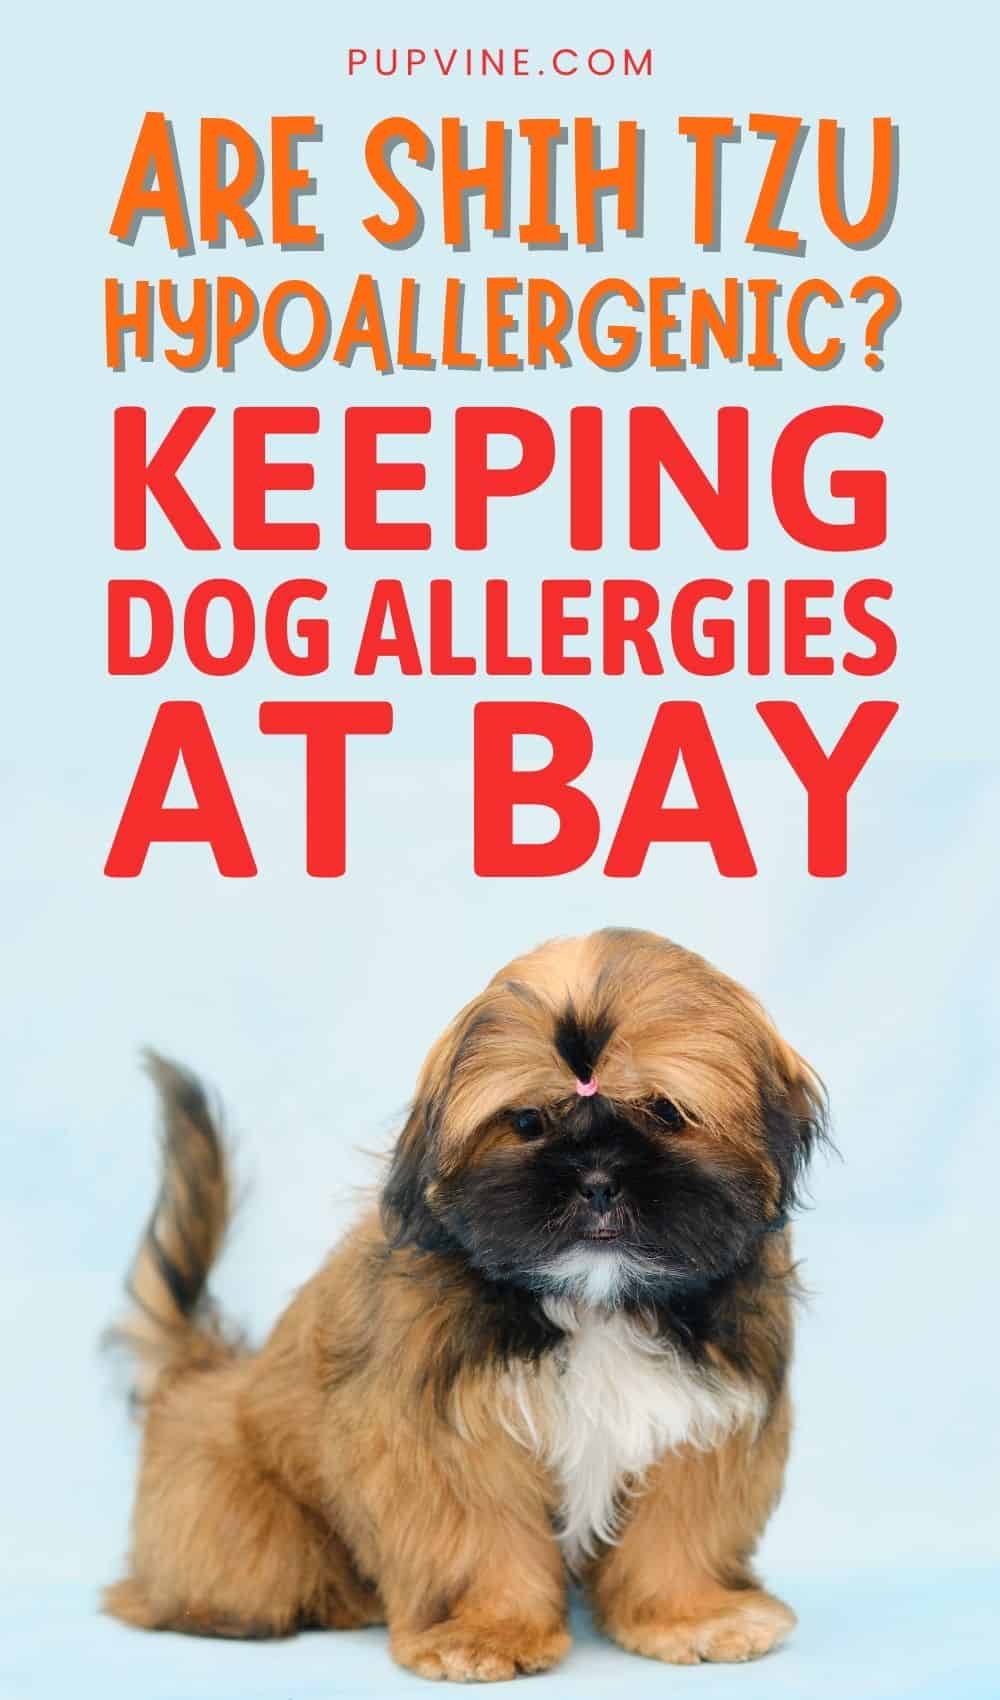 Are Shih Tzu Hypoallergenic? Keeping Dog Allergies At Bay